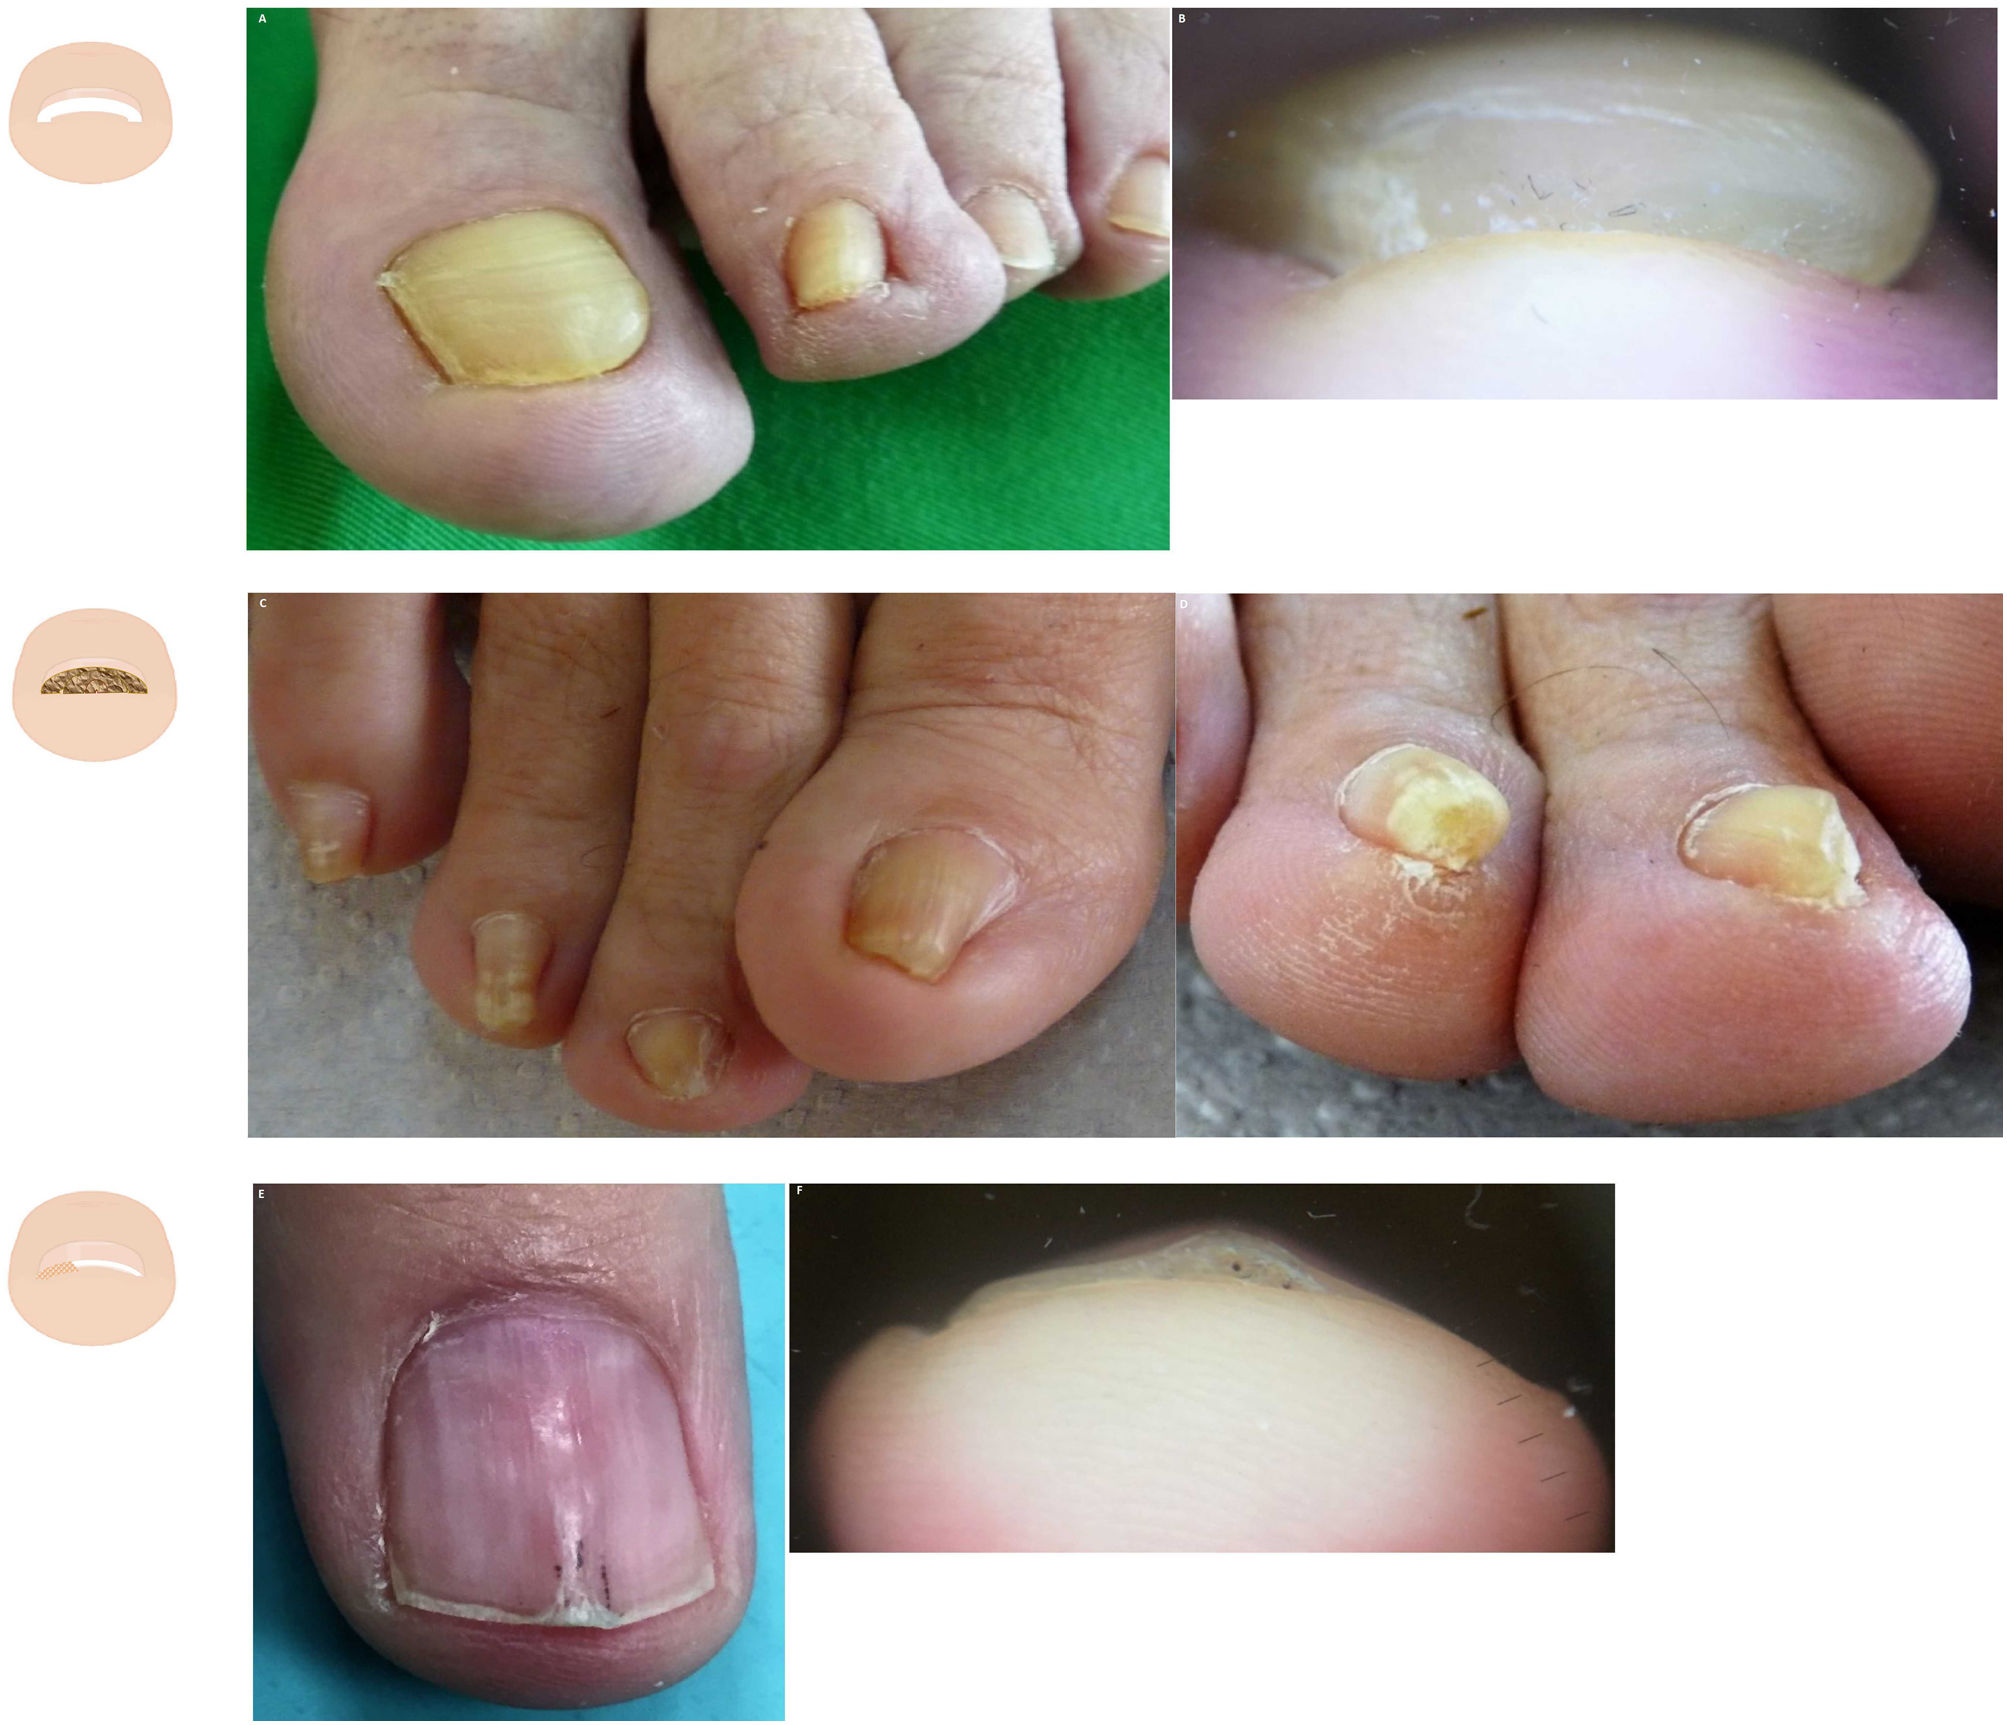 Nail lichen planus: a patient with atypical presentation